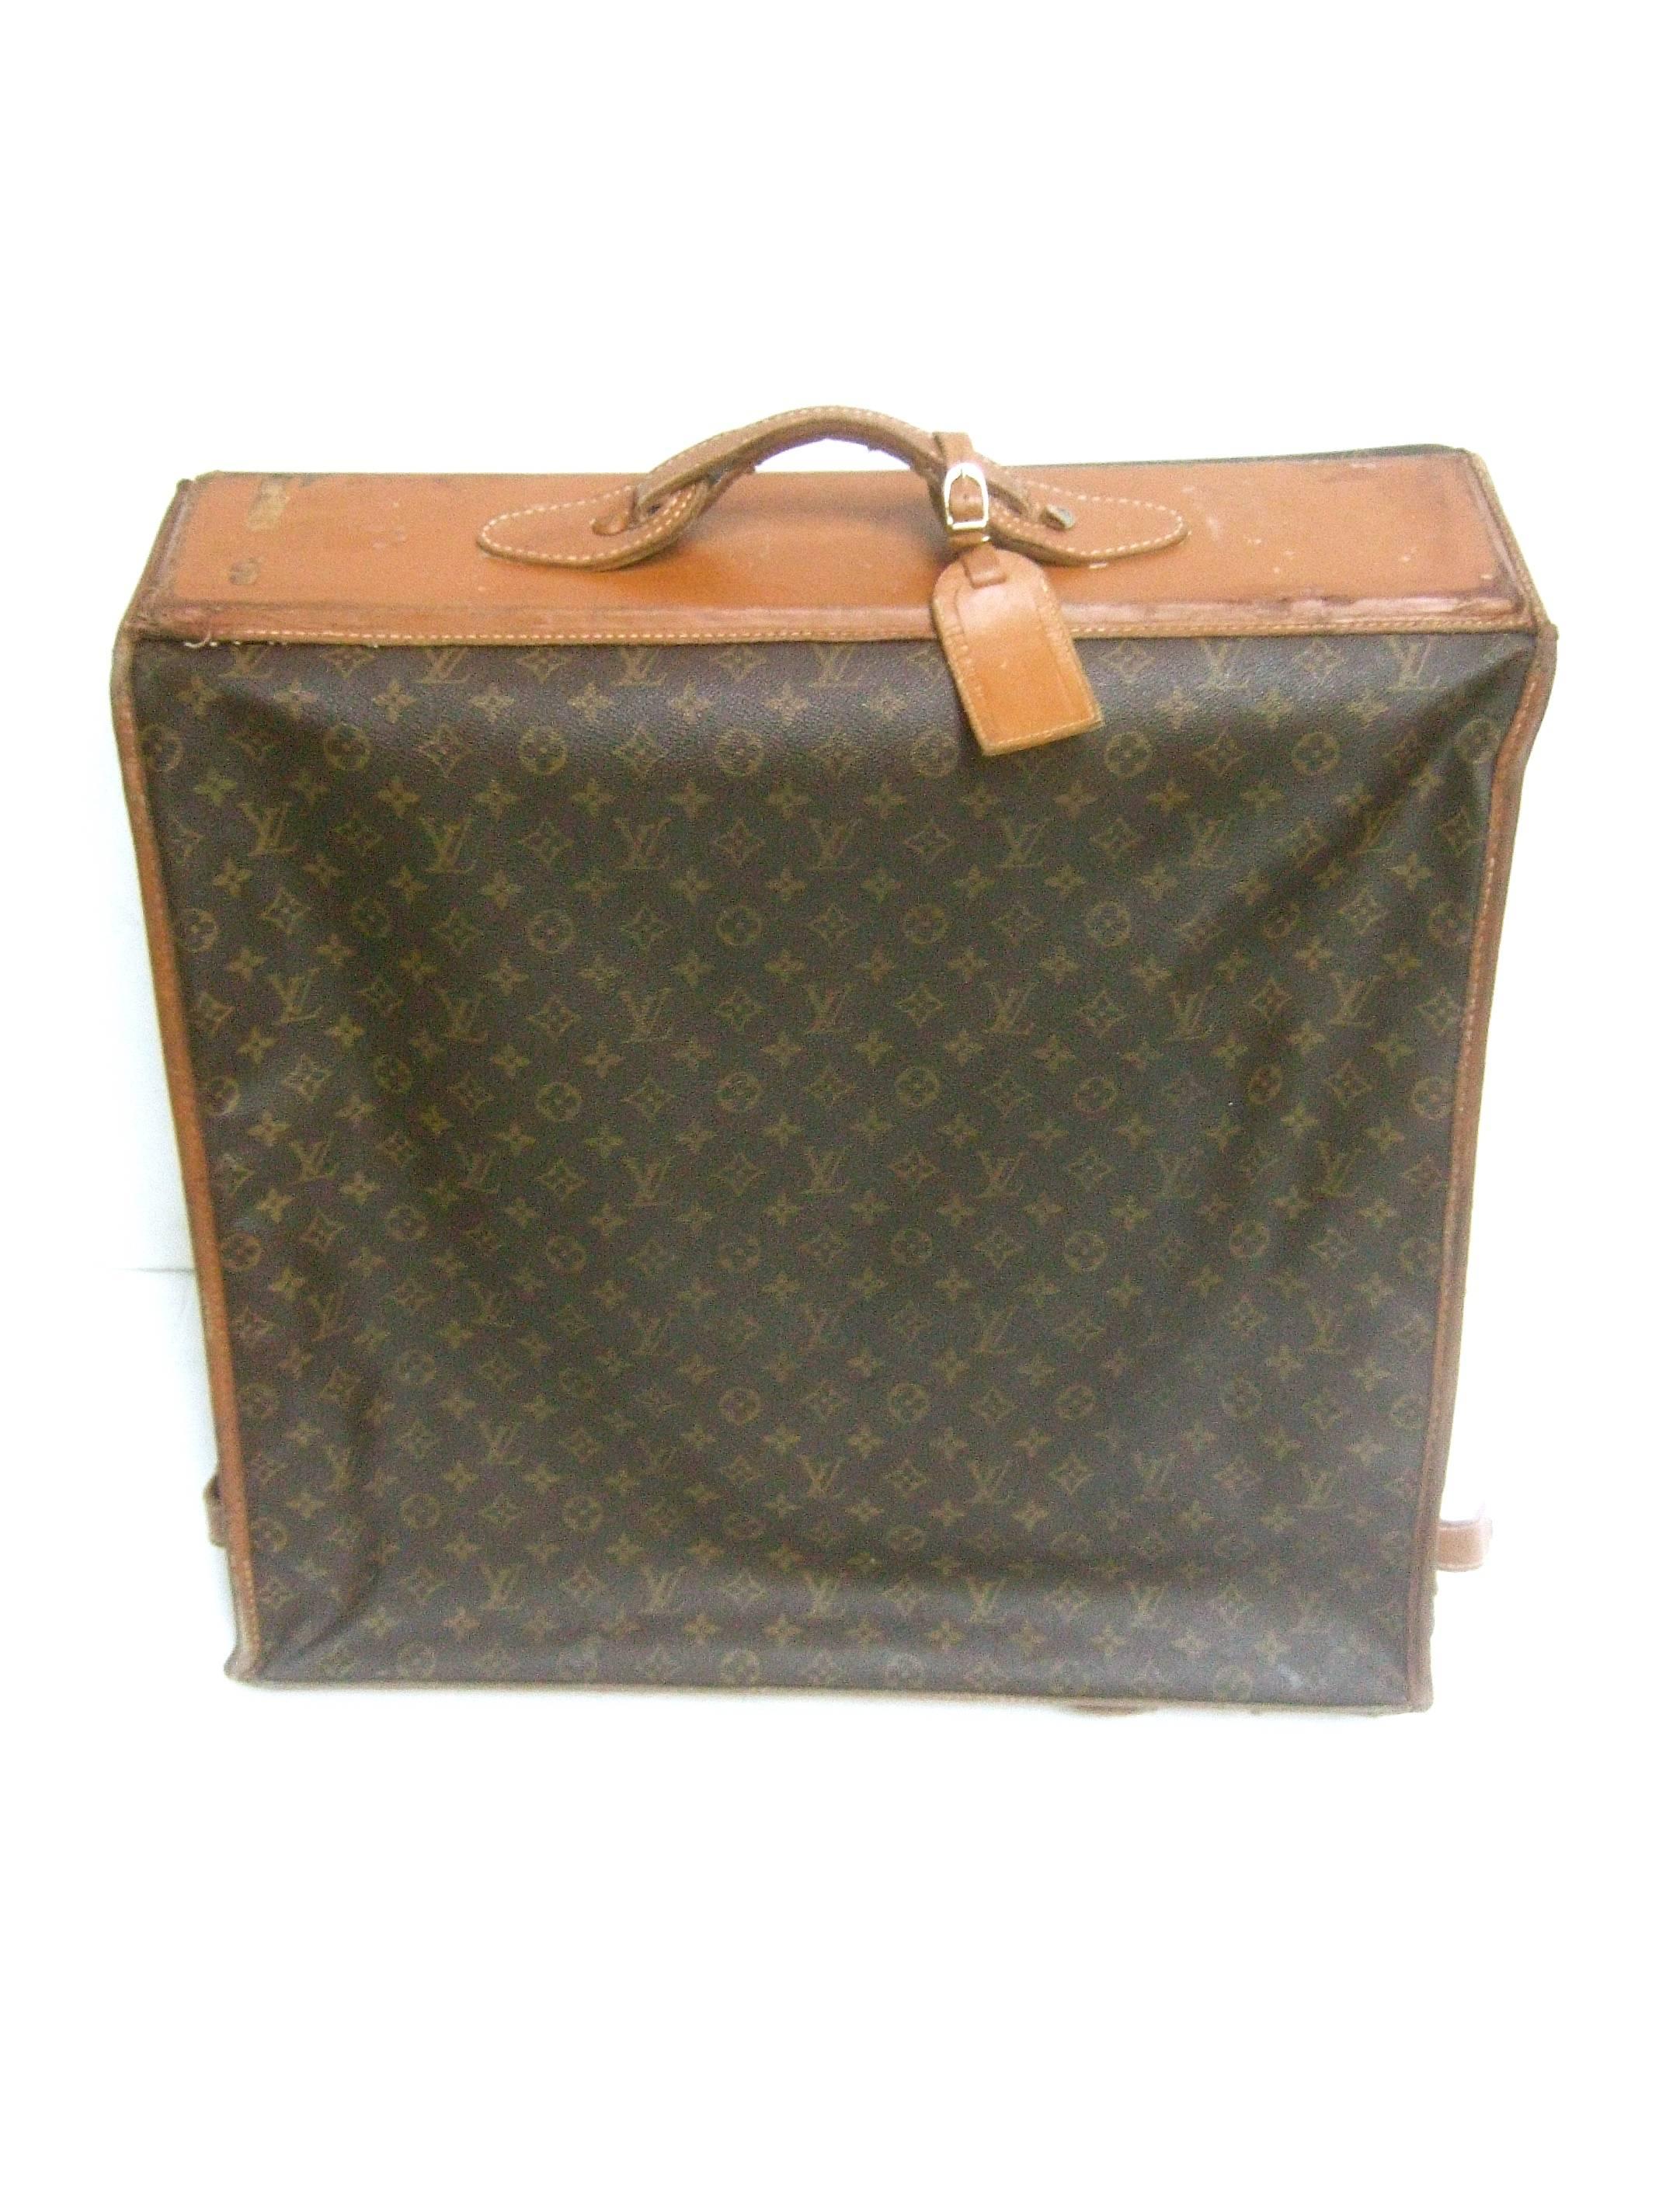 Louis Vuitton Shabby Chic Well Loved Garment Travel Case c 1970s 4